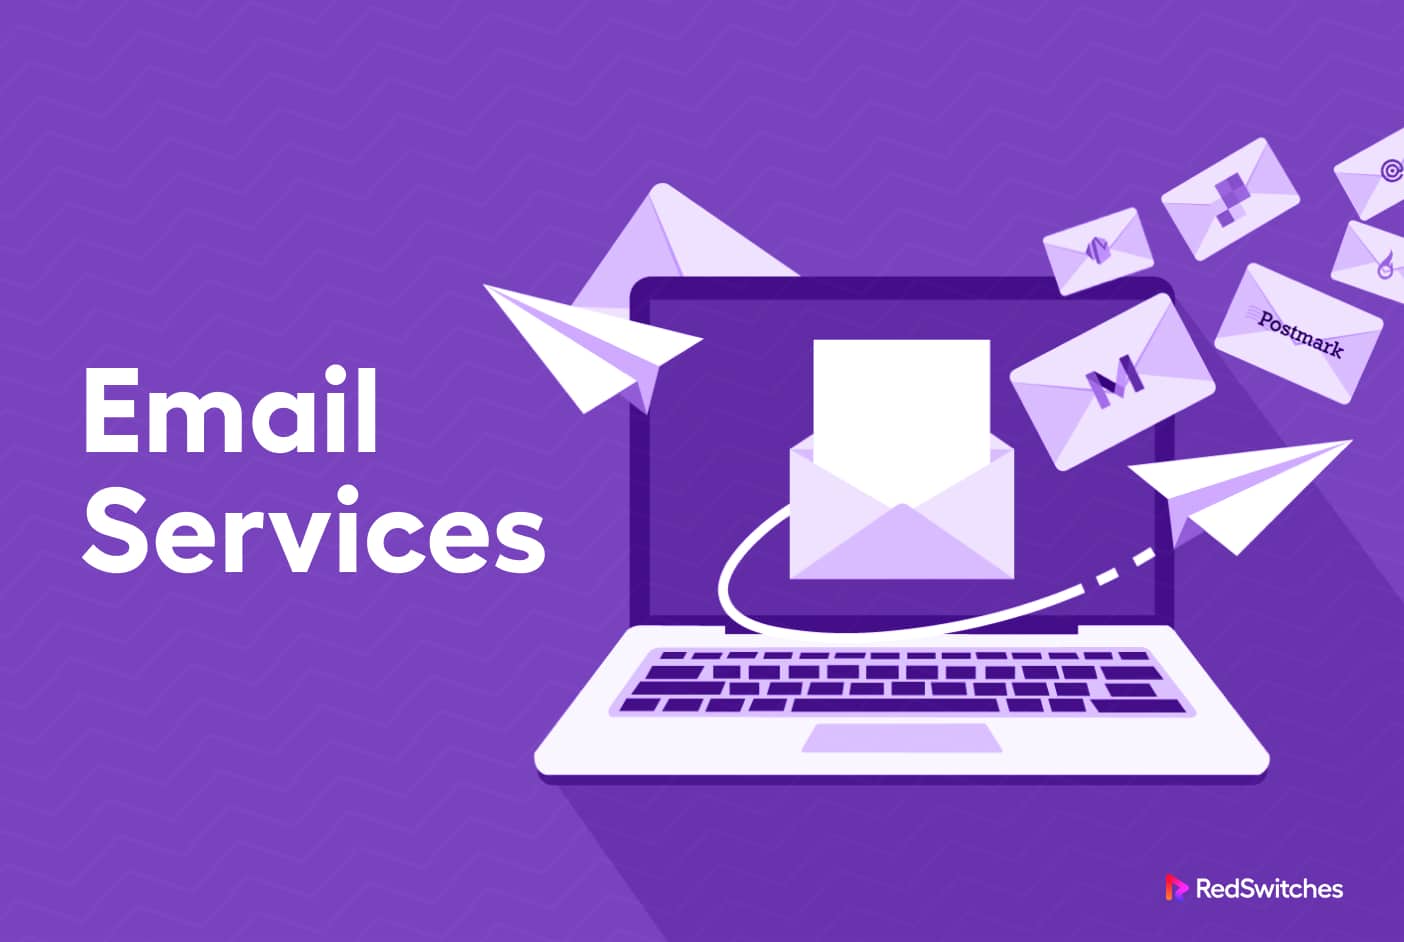 email services is a examples of databases